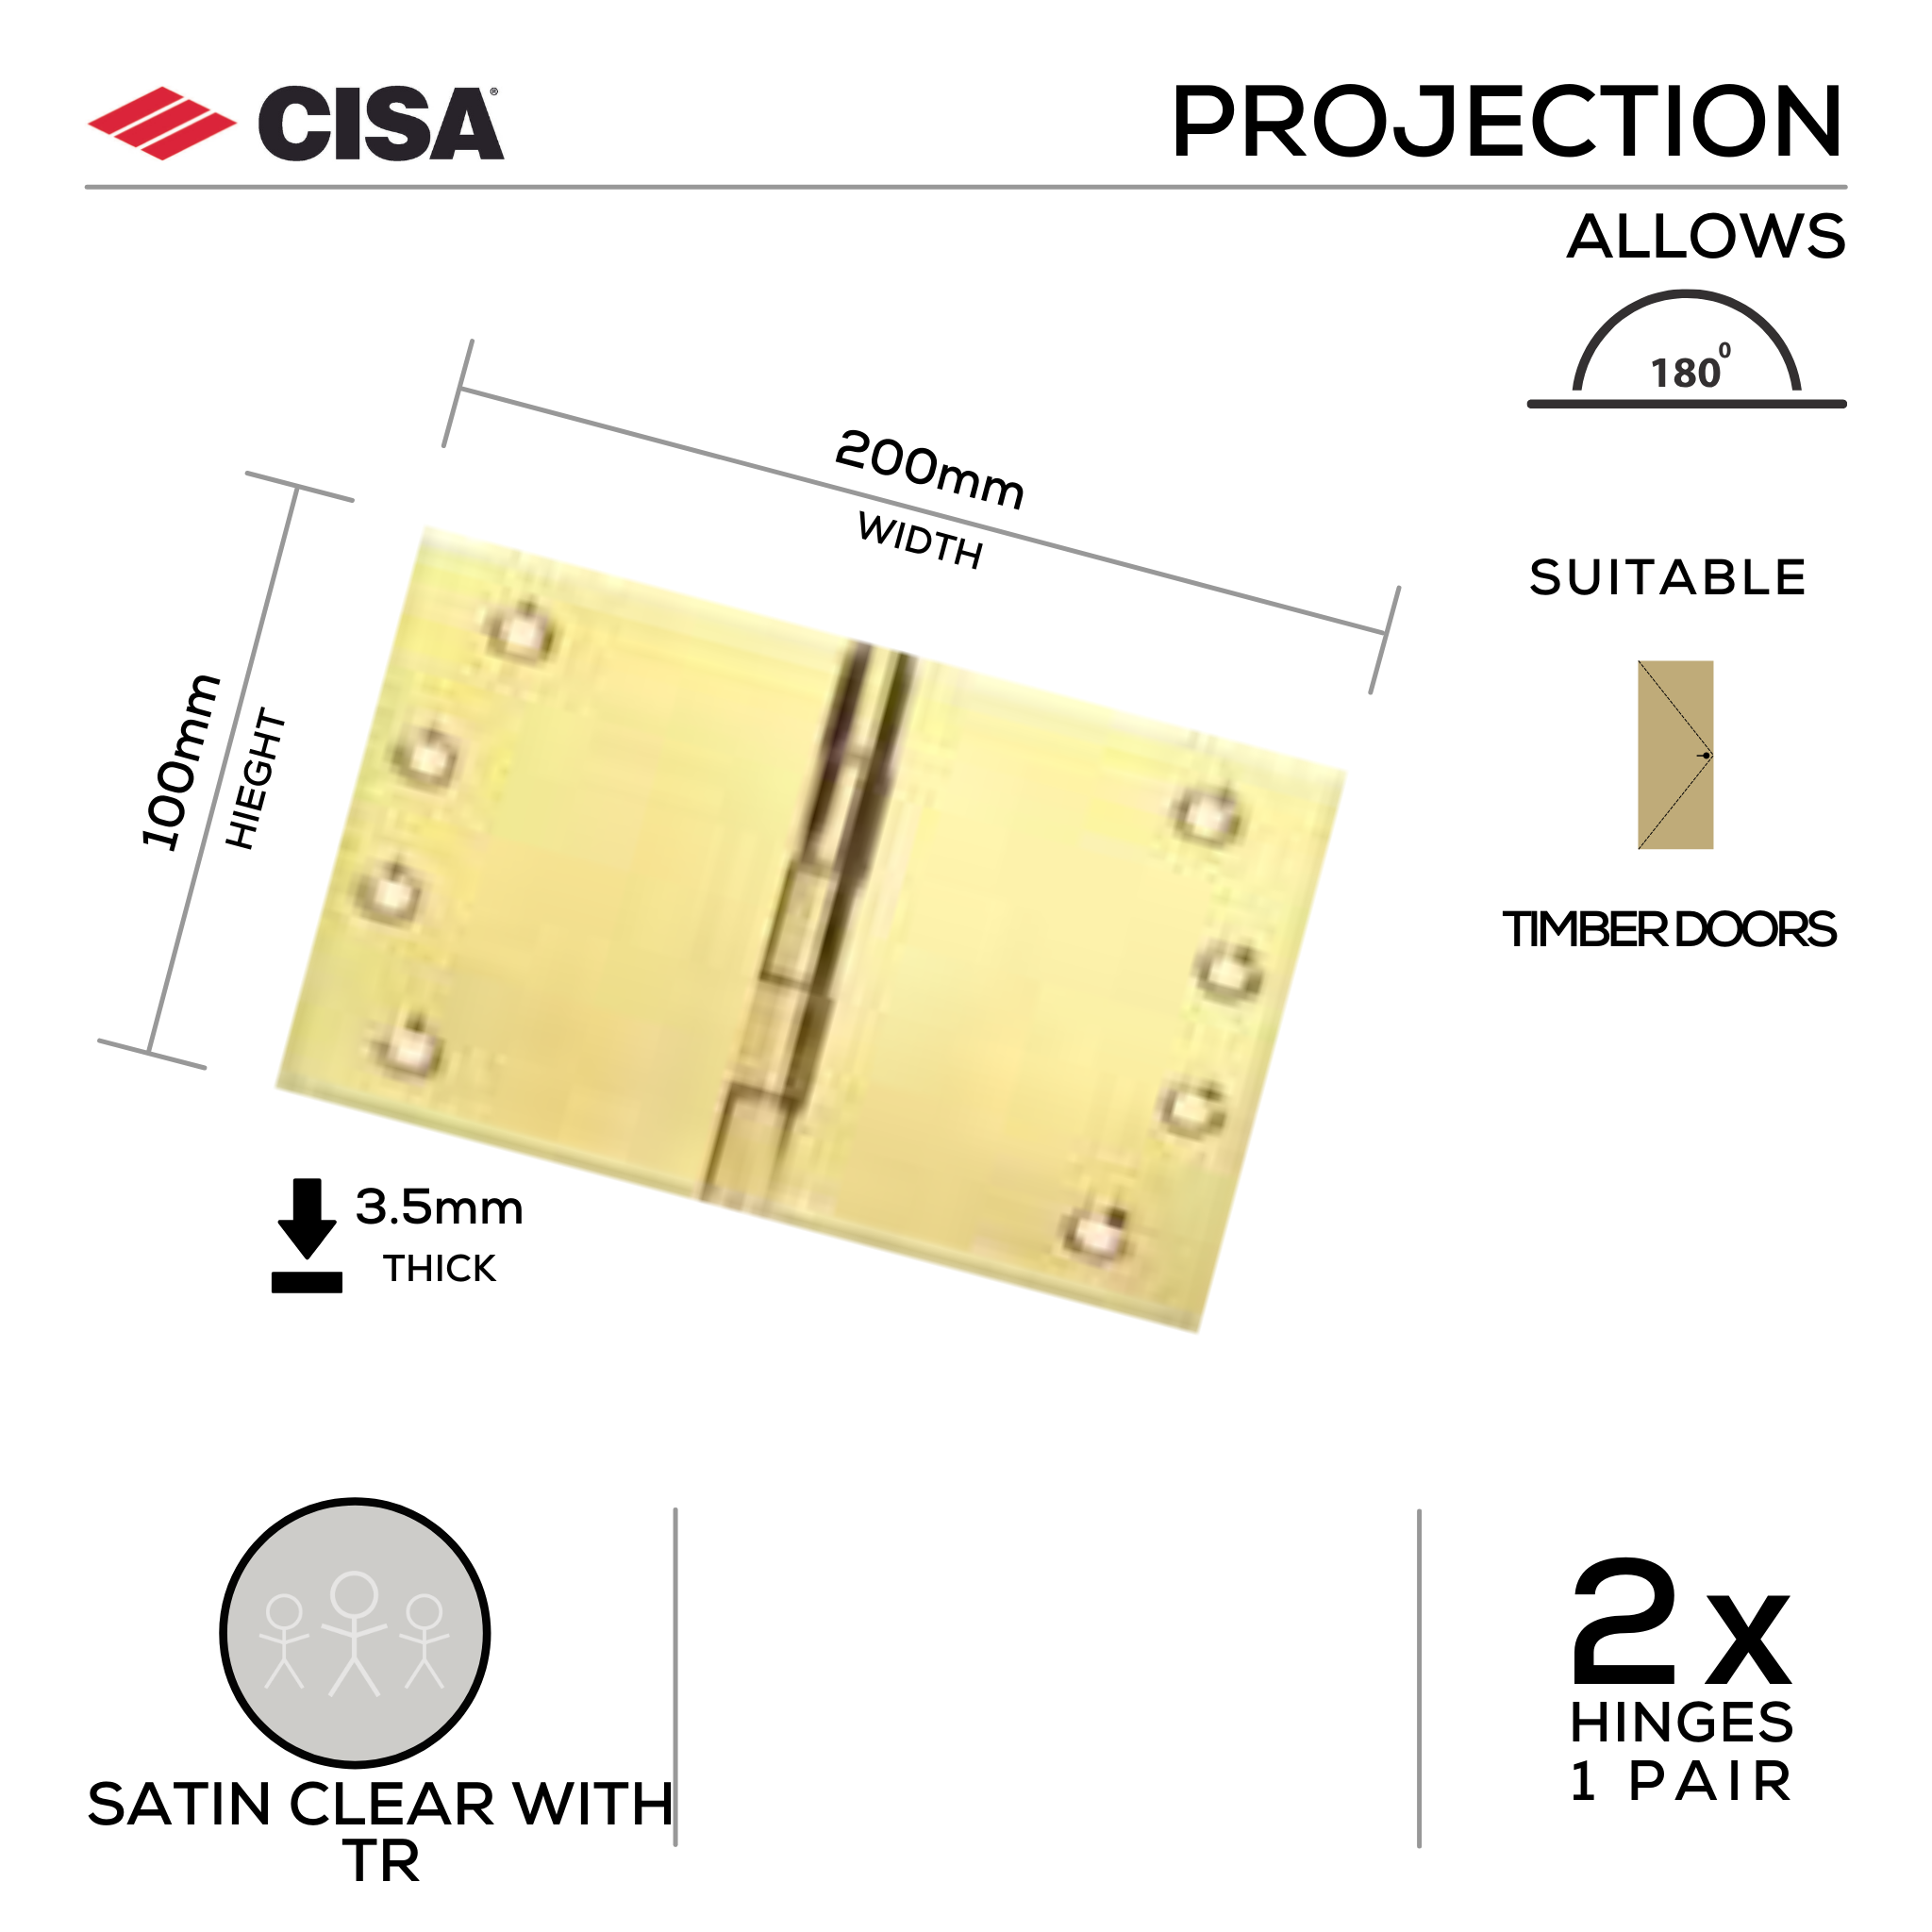 FH200X3-TR, Projection Hinge, 2 x Hinges (1 Pair), 100mm (h) x 200mm (w) x 3.5mm (t), Satin with Tarnish Resistant, CISA